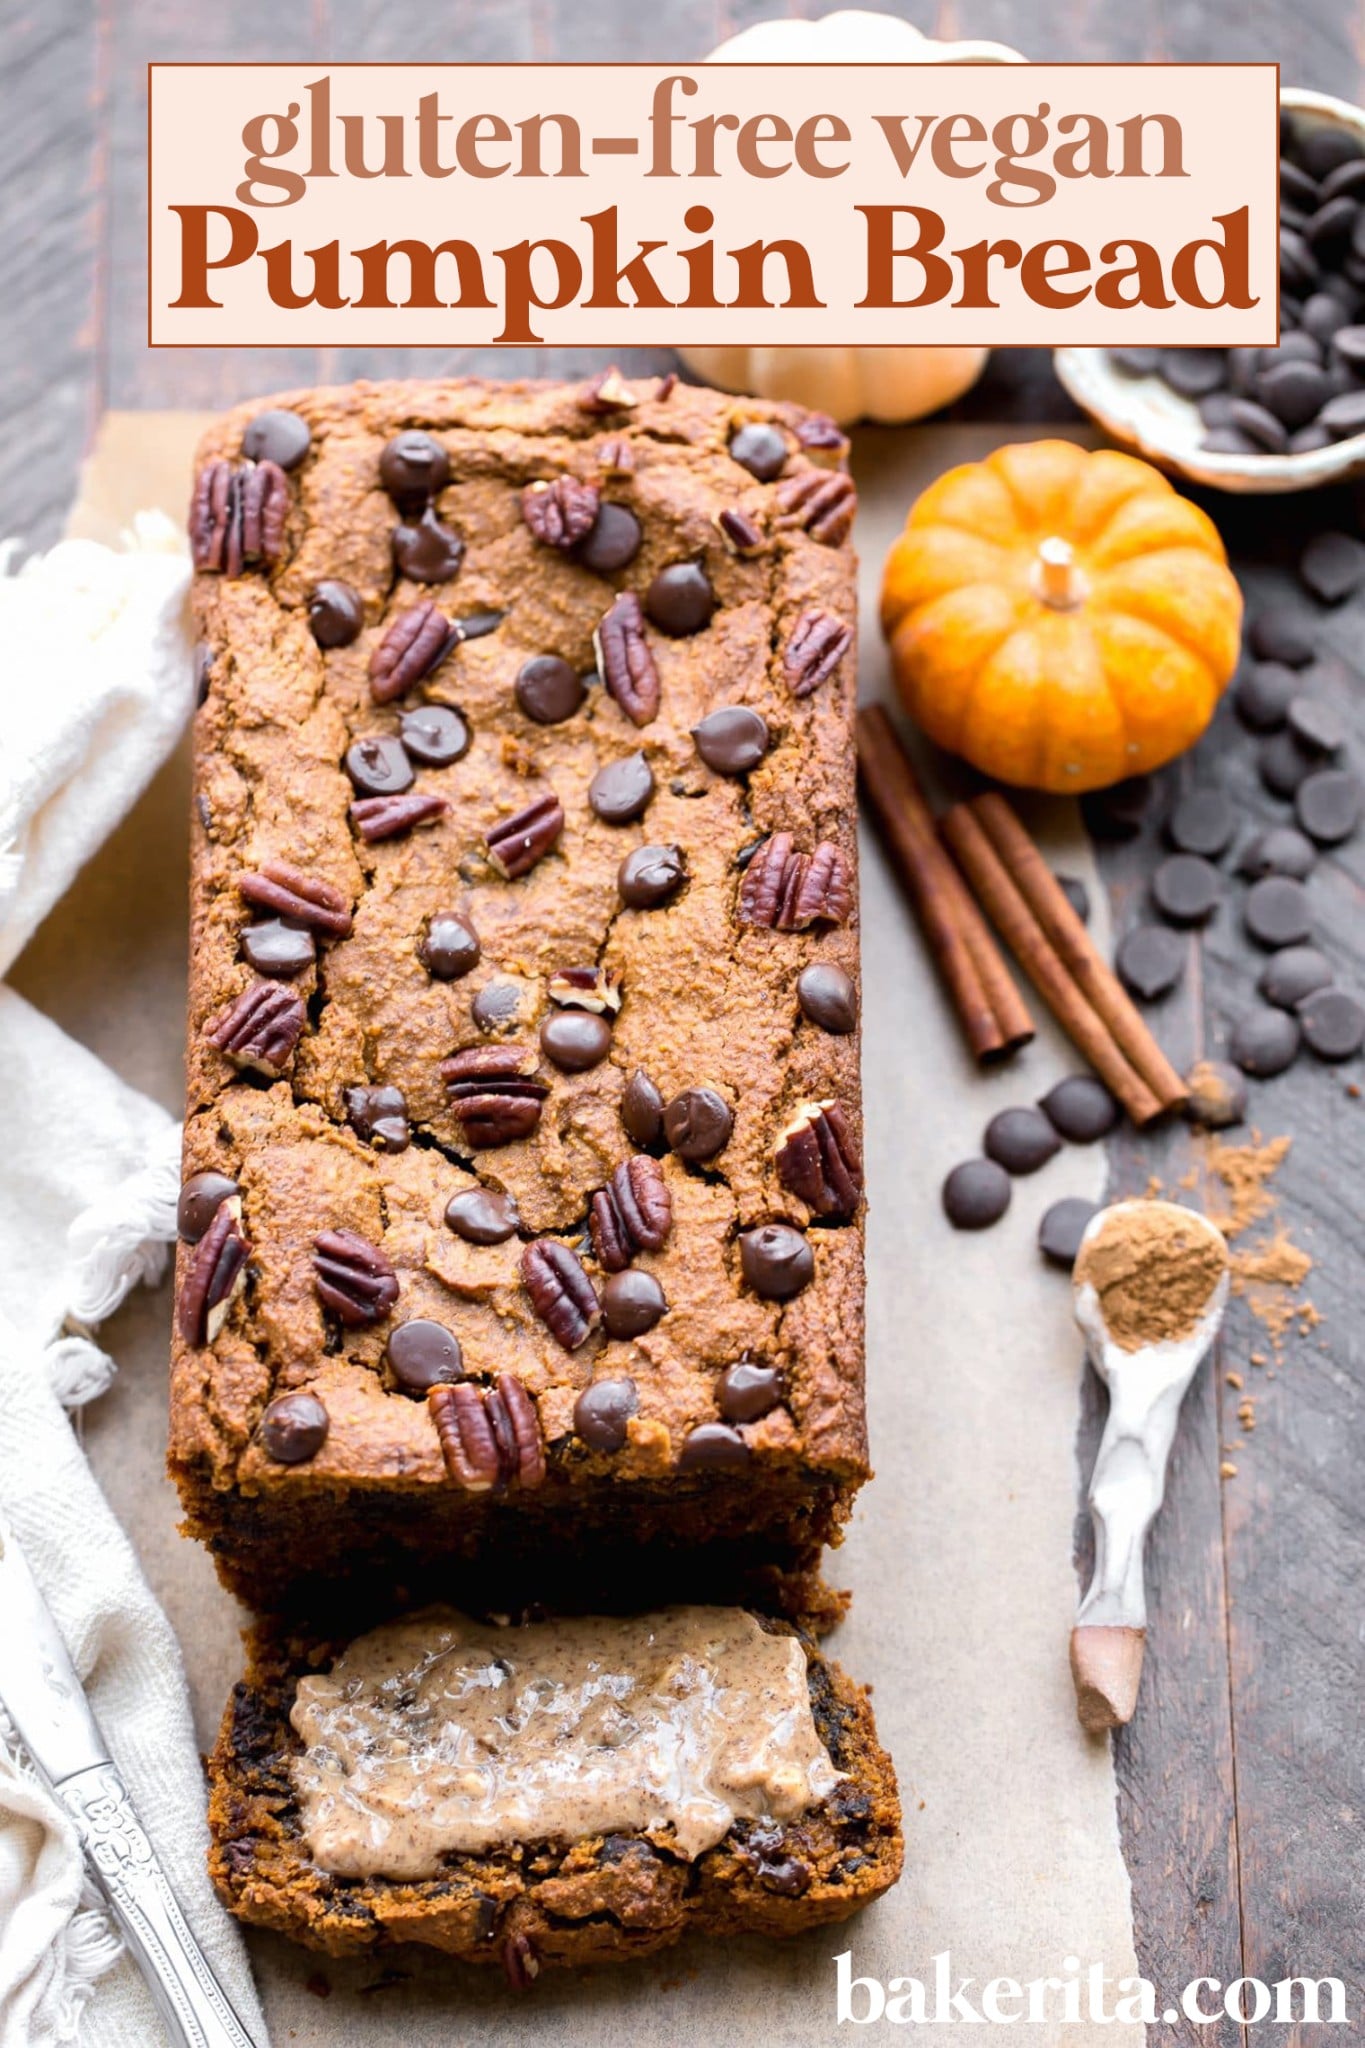 This Chocolate Chip Vegan Pumpkin Bread is quick and easy to make in one bowl! It's warm and flavorful with lots of pumpkin pie spice and chocolate chips. This gluten-free, refined sugar-free, and vegan pumpkin bread makes a perfect breakfast or snack!